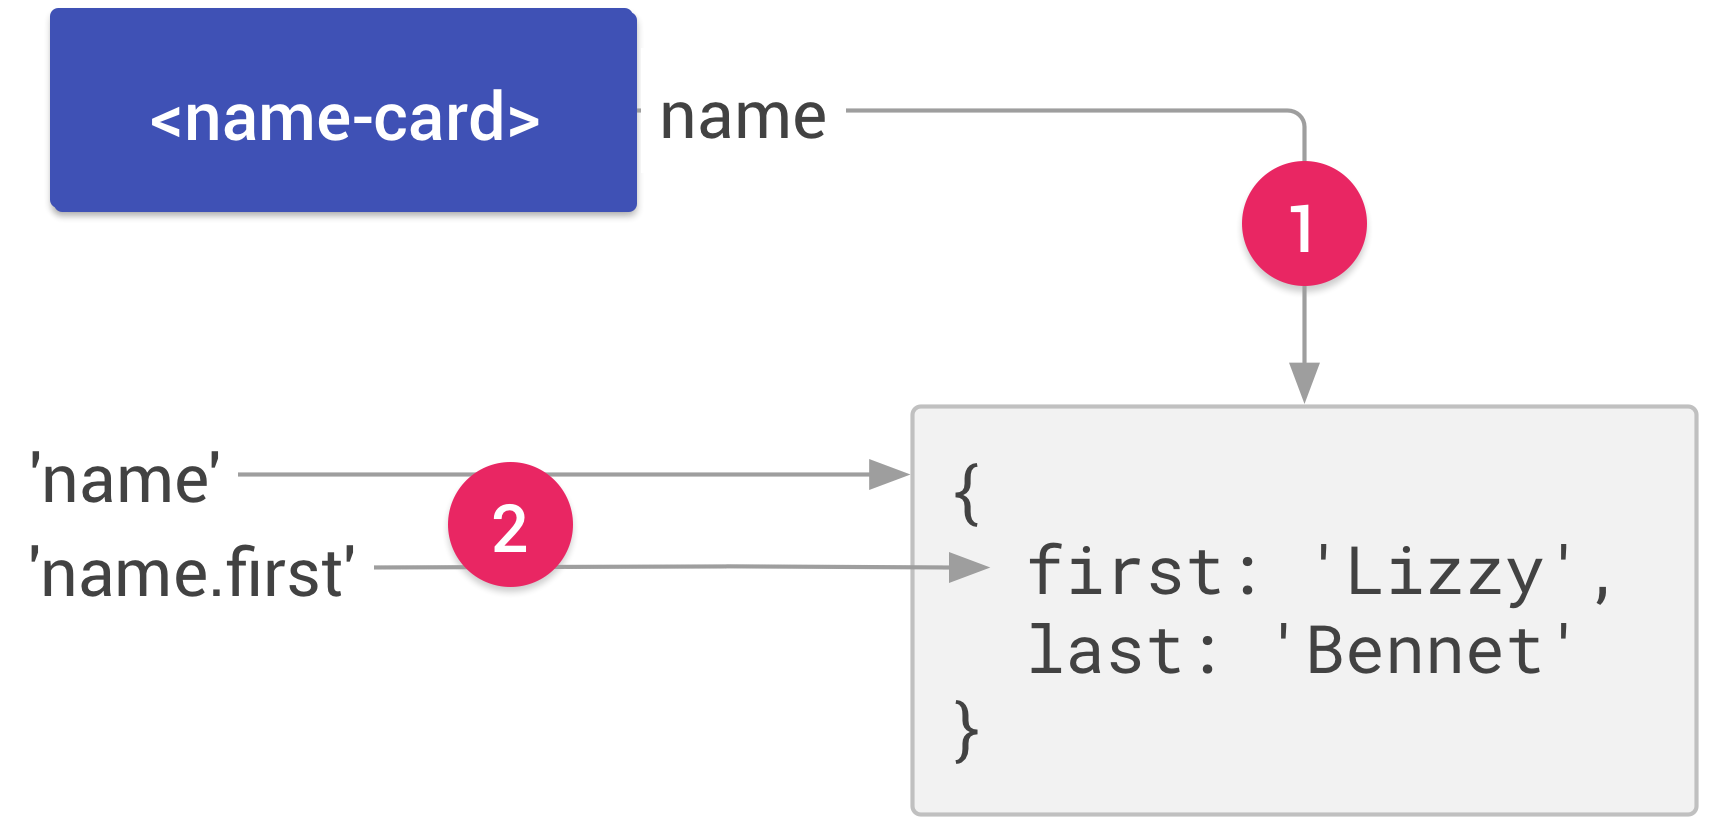 The name-card element from the previous figure. An arrow labeled 1 connects the name propertyto a JavaScript object that contains two properties, first: 'Lizzy' and last: 'Bennet'. Two arrowslabeled 2 connect the paths name and name.first with the object itself and the subproperty,first, respectively.